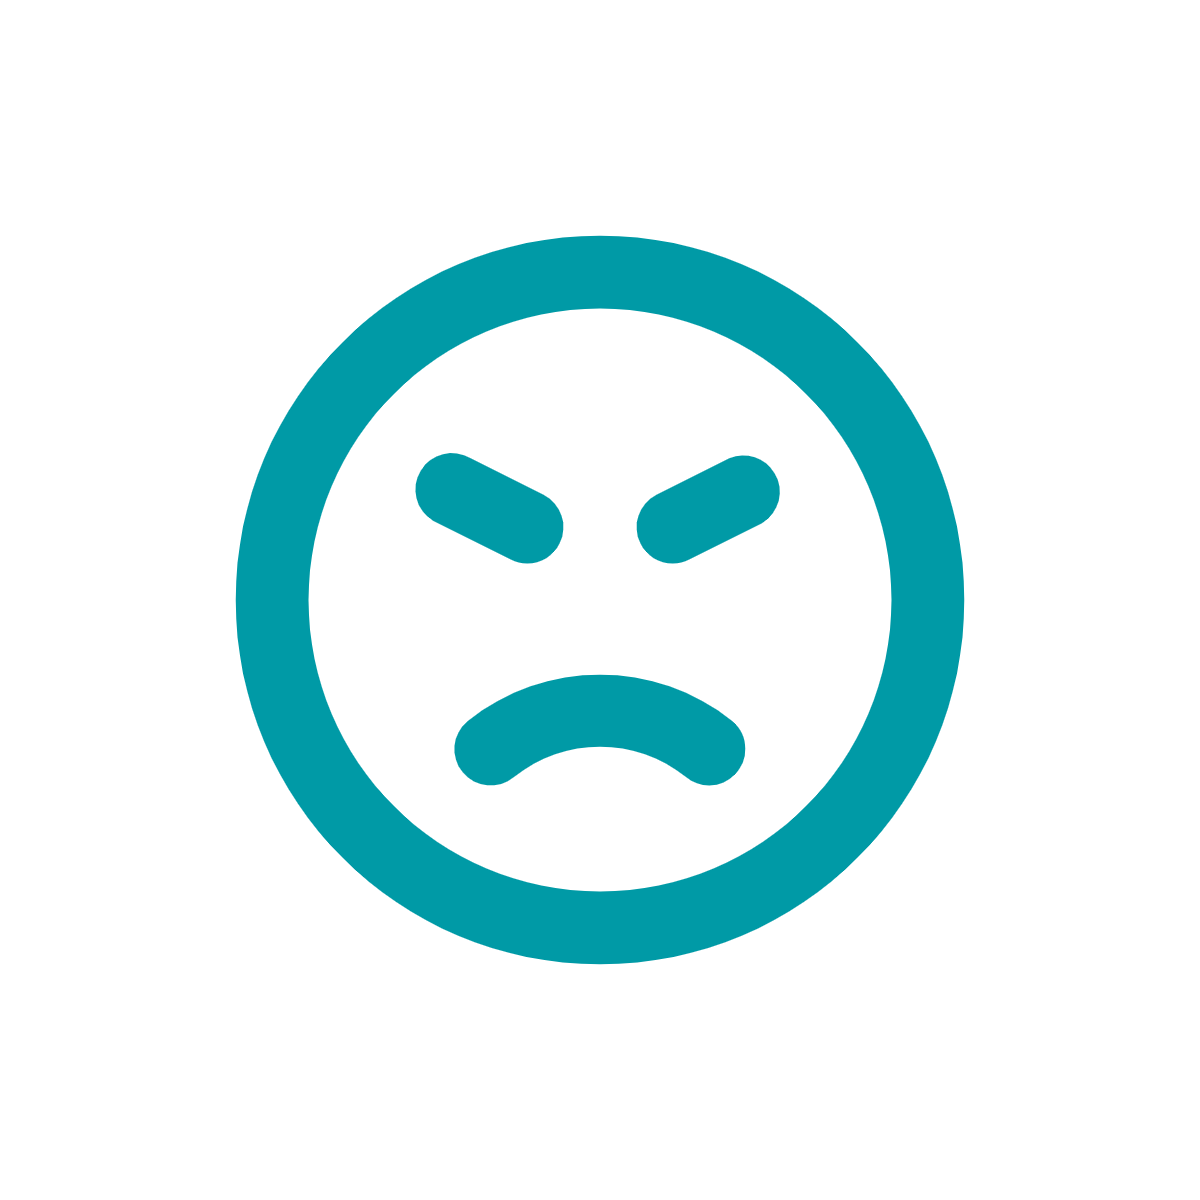 Green icon of angry face